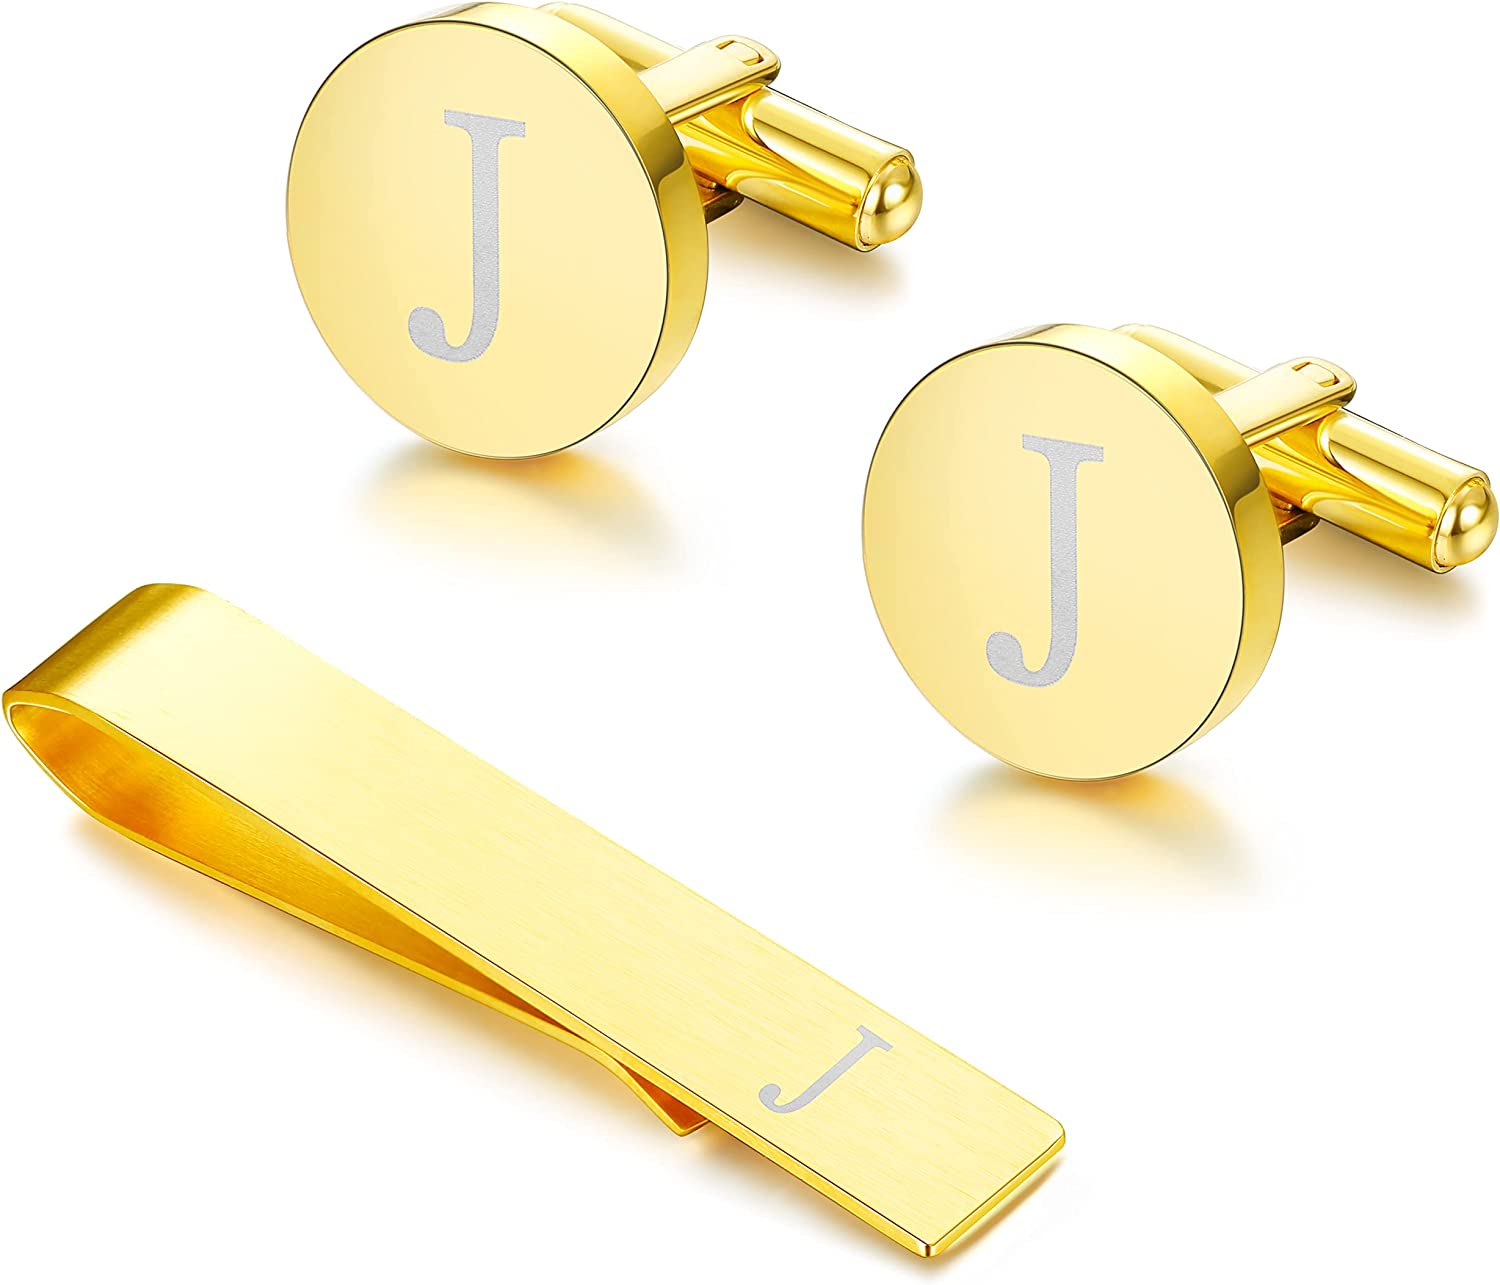 Diamday Initial Cufflinks and Tie Clip Set for Men Personalized Gold Stainless Steel Cuff Links and Tie Bar Letter Alphabet A-Z Gift with Box for Wedding, Groomsmen, Husband，Father